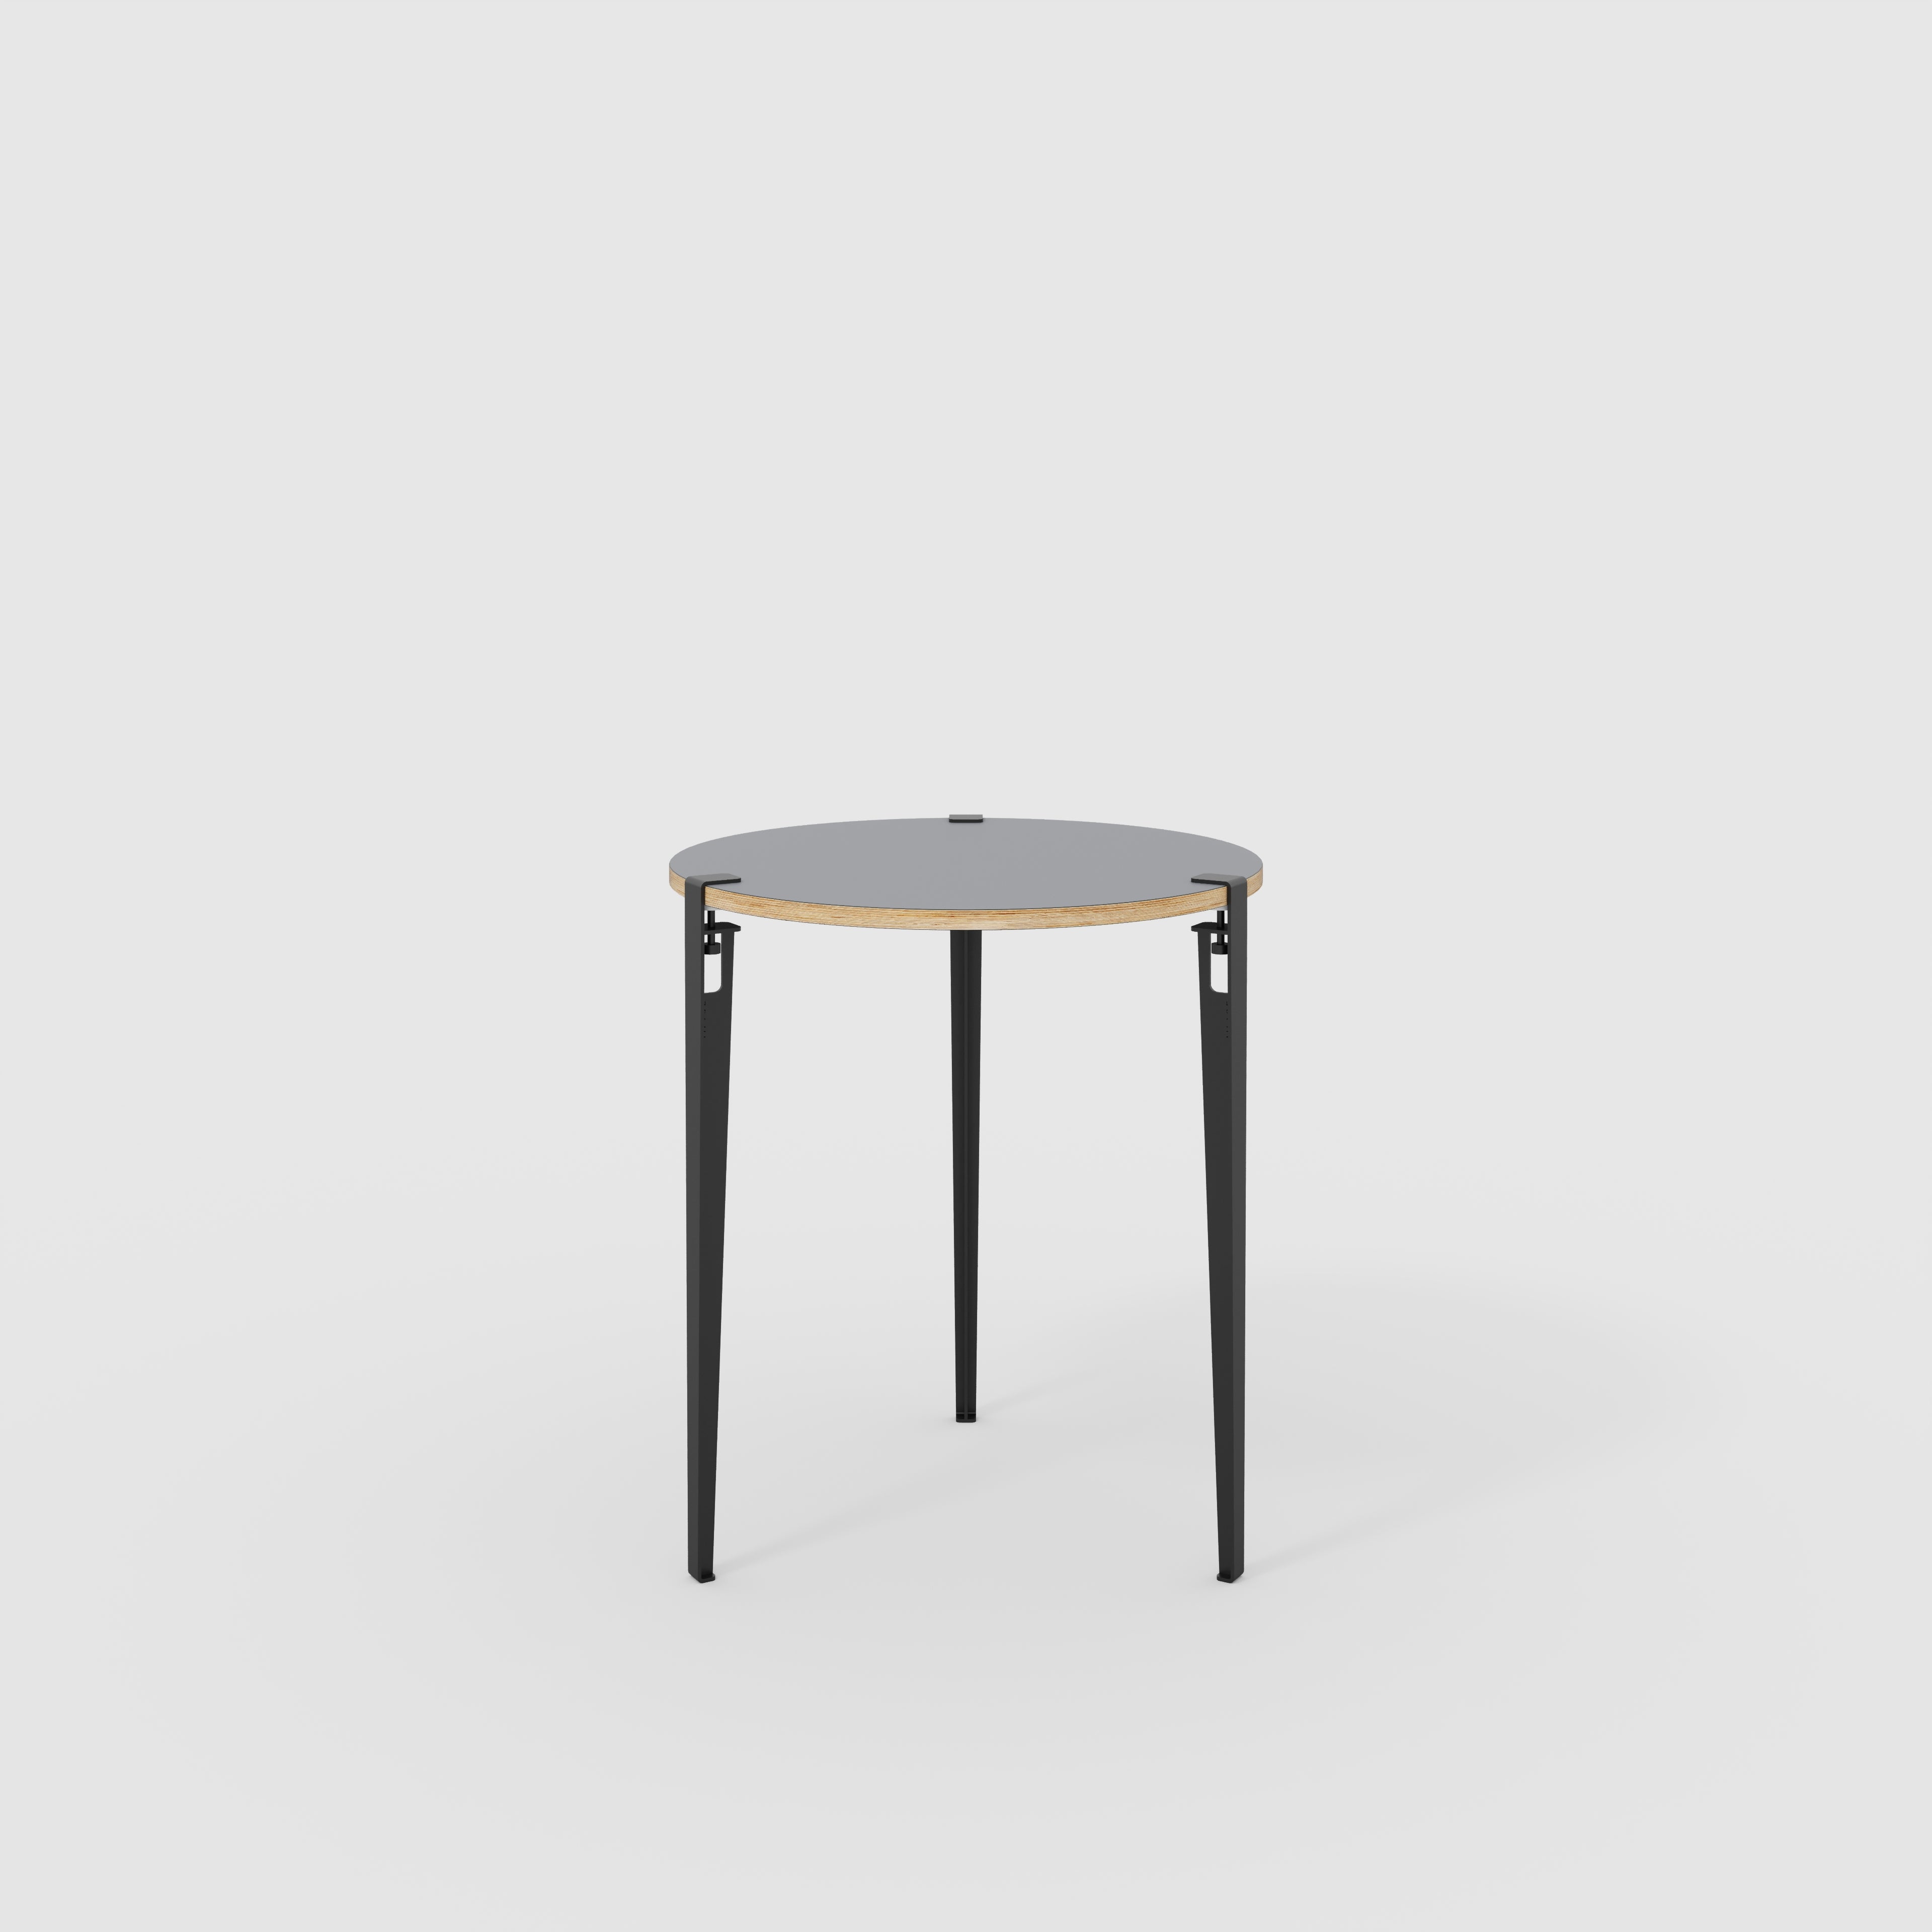 Round Table with Black Tiptoe Legs - Formica Tornado Grey - 800(dia) x 900(h)